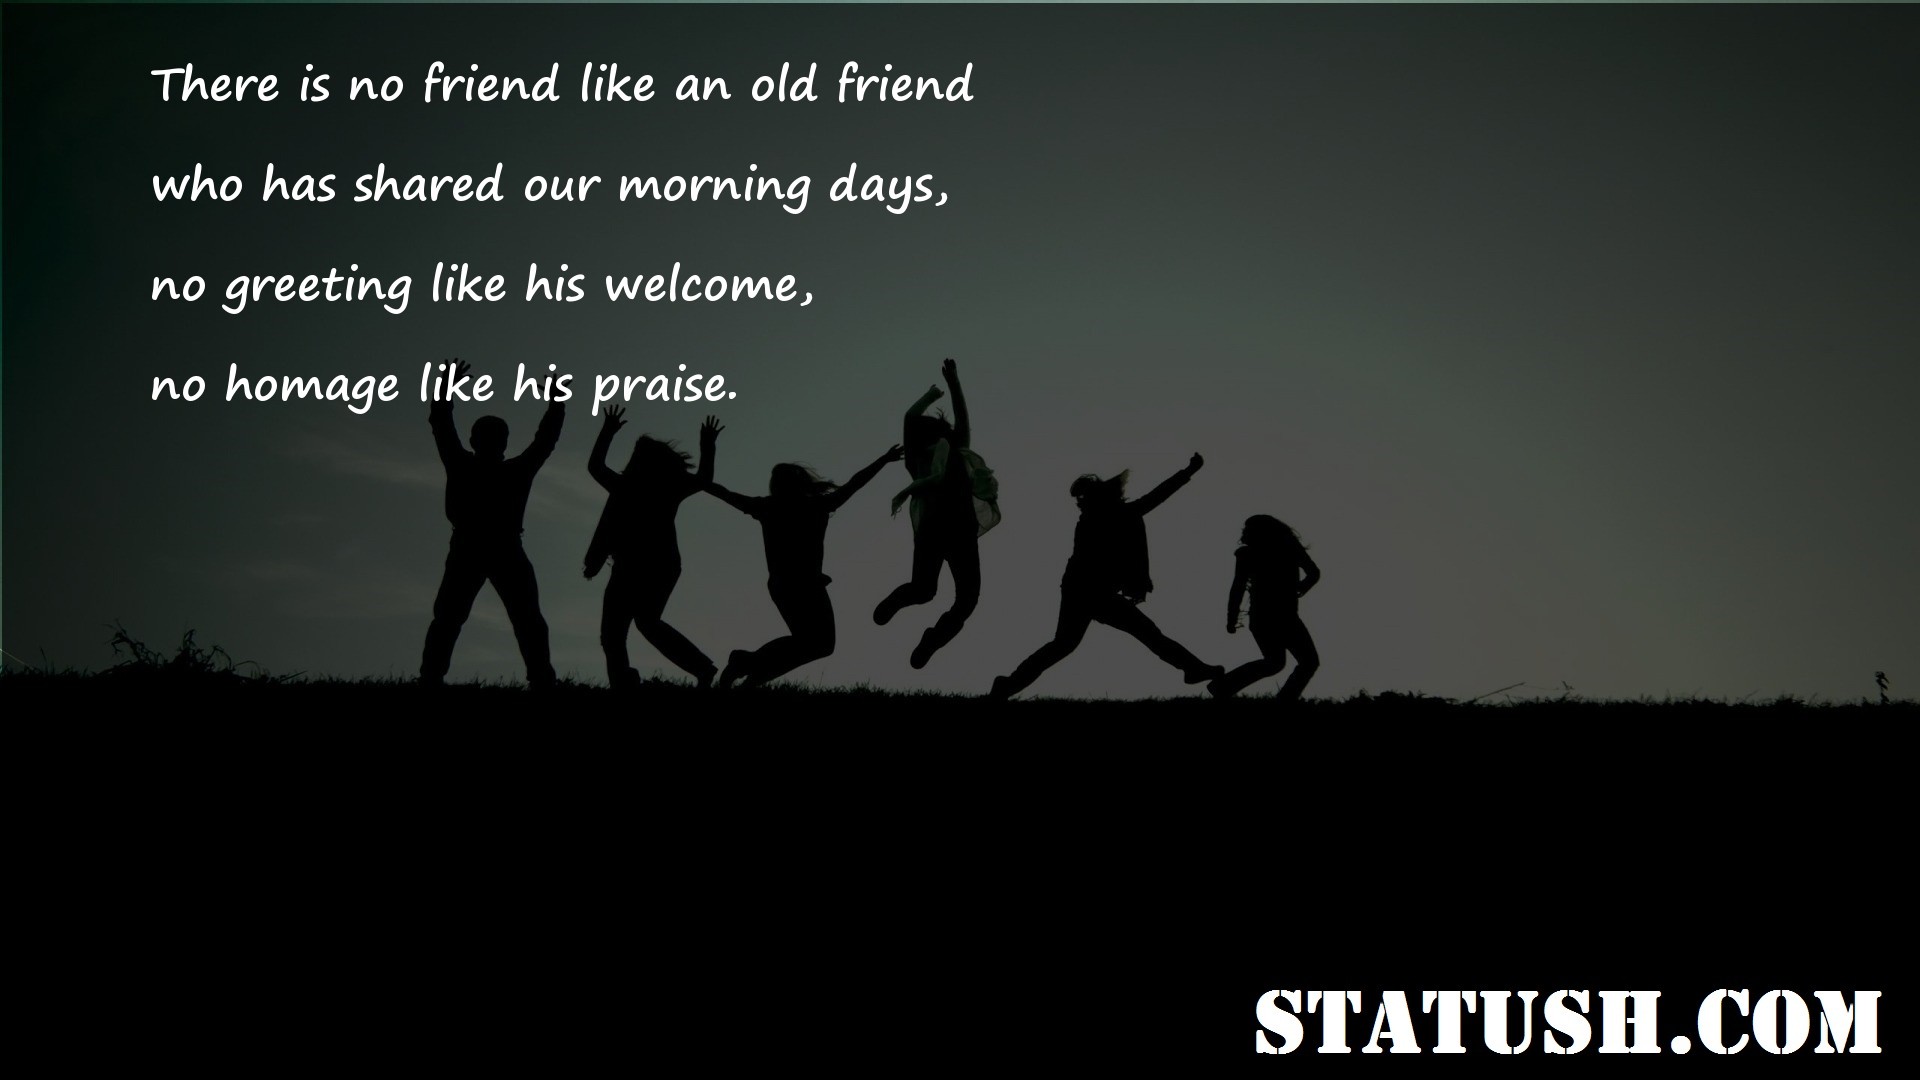 There is no friend like an old friend Friendship Quotes at statush.com